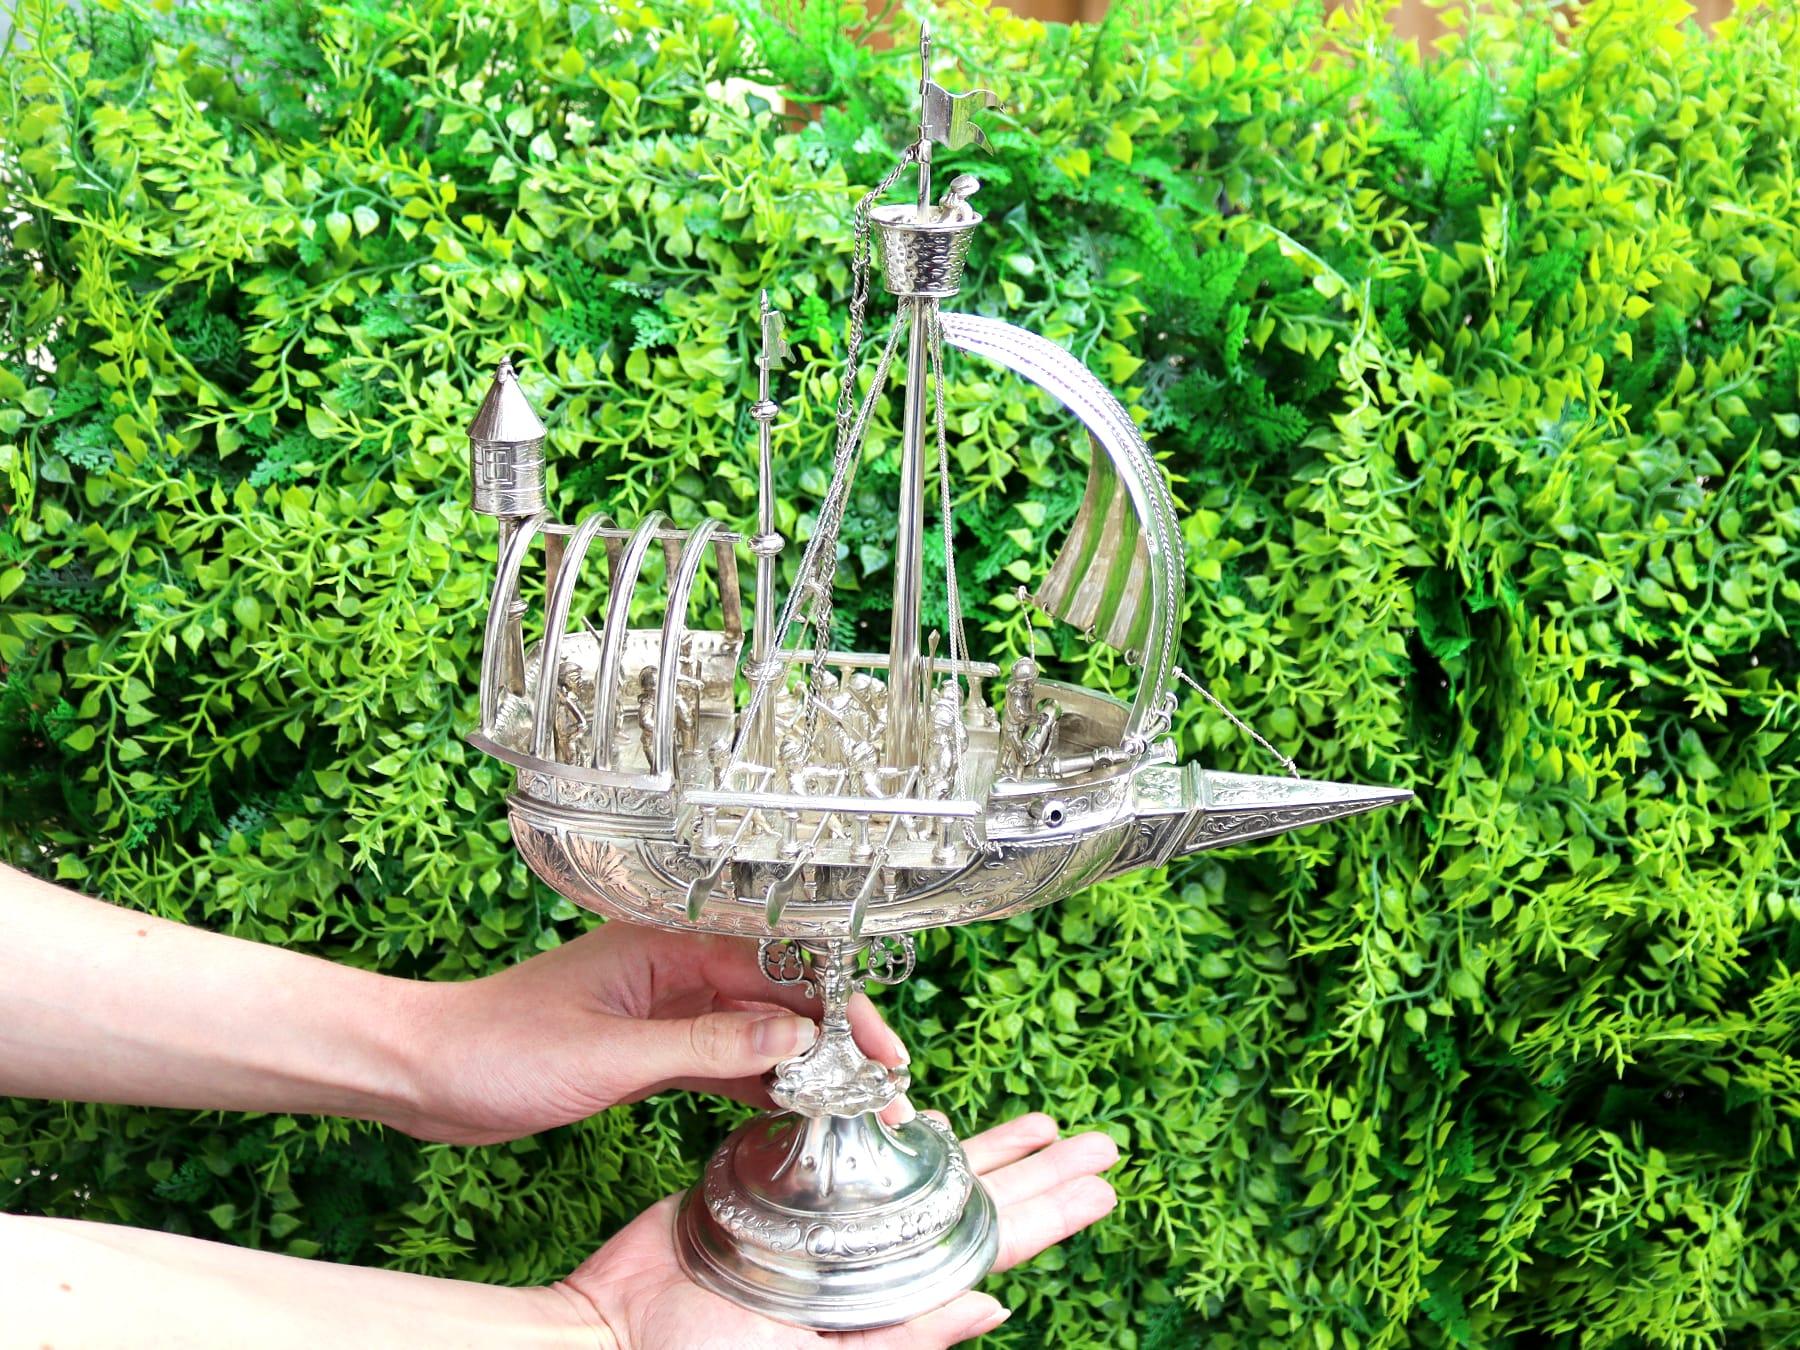 This exceptional, fine and impressive antique French silver nef* has been realistically modelled in the form of a ship.

The surface of the vessel is ornamented with impressive chased decoration paralleling the ship's form and depicting fish and